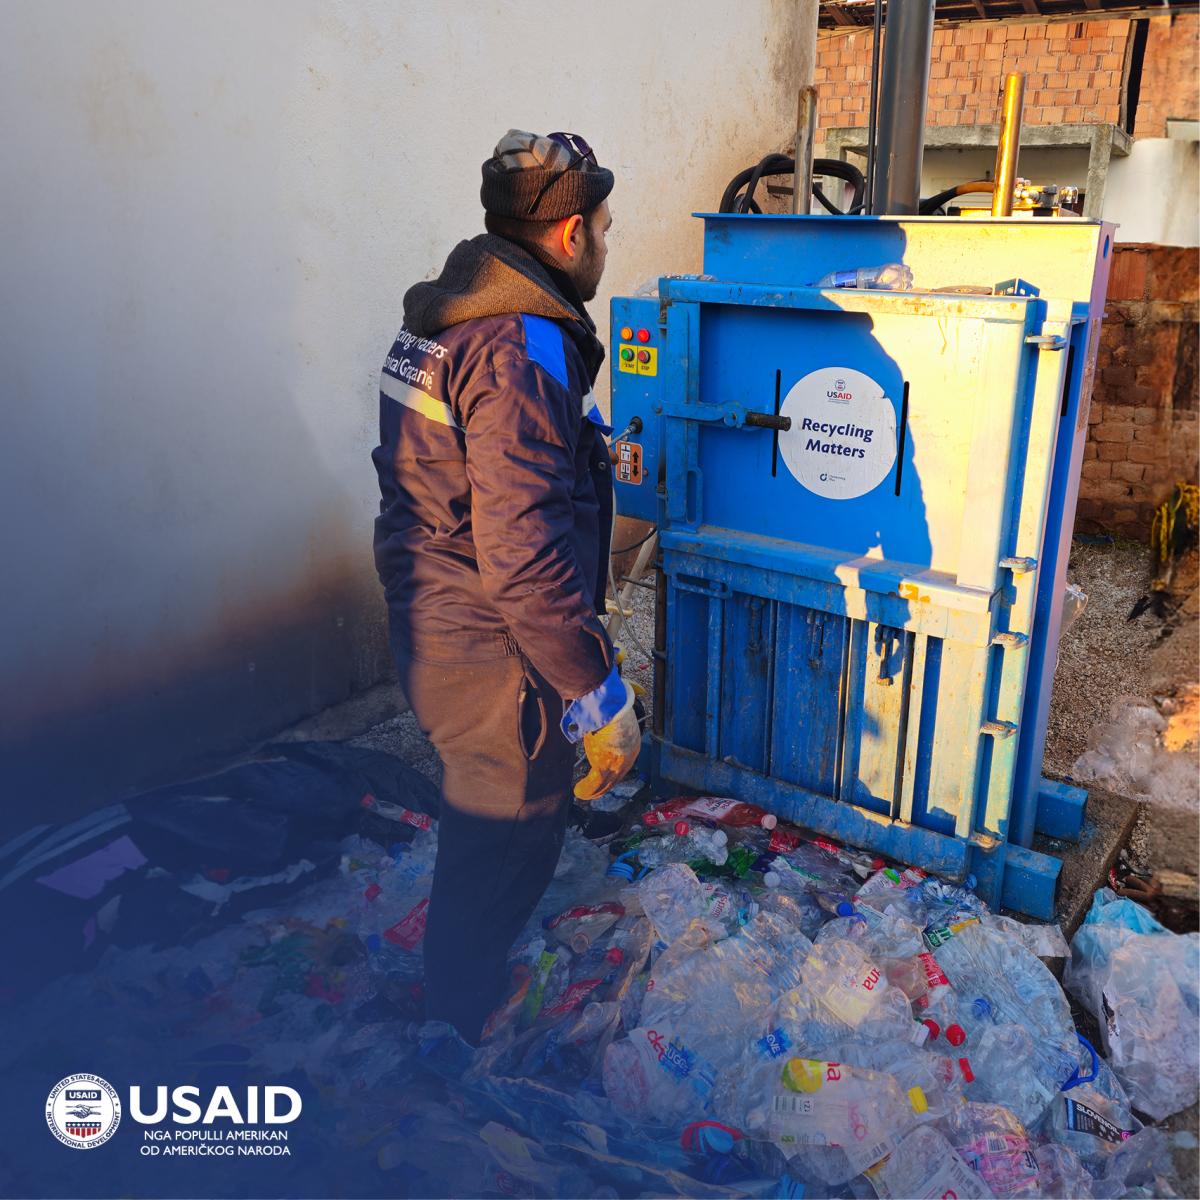 Better Conditions for Marginalized Communities through Recycling